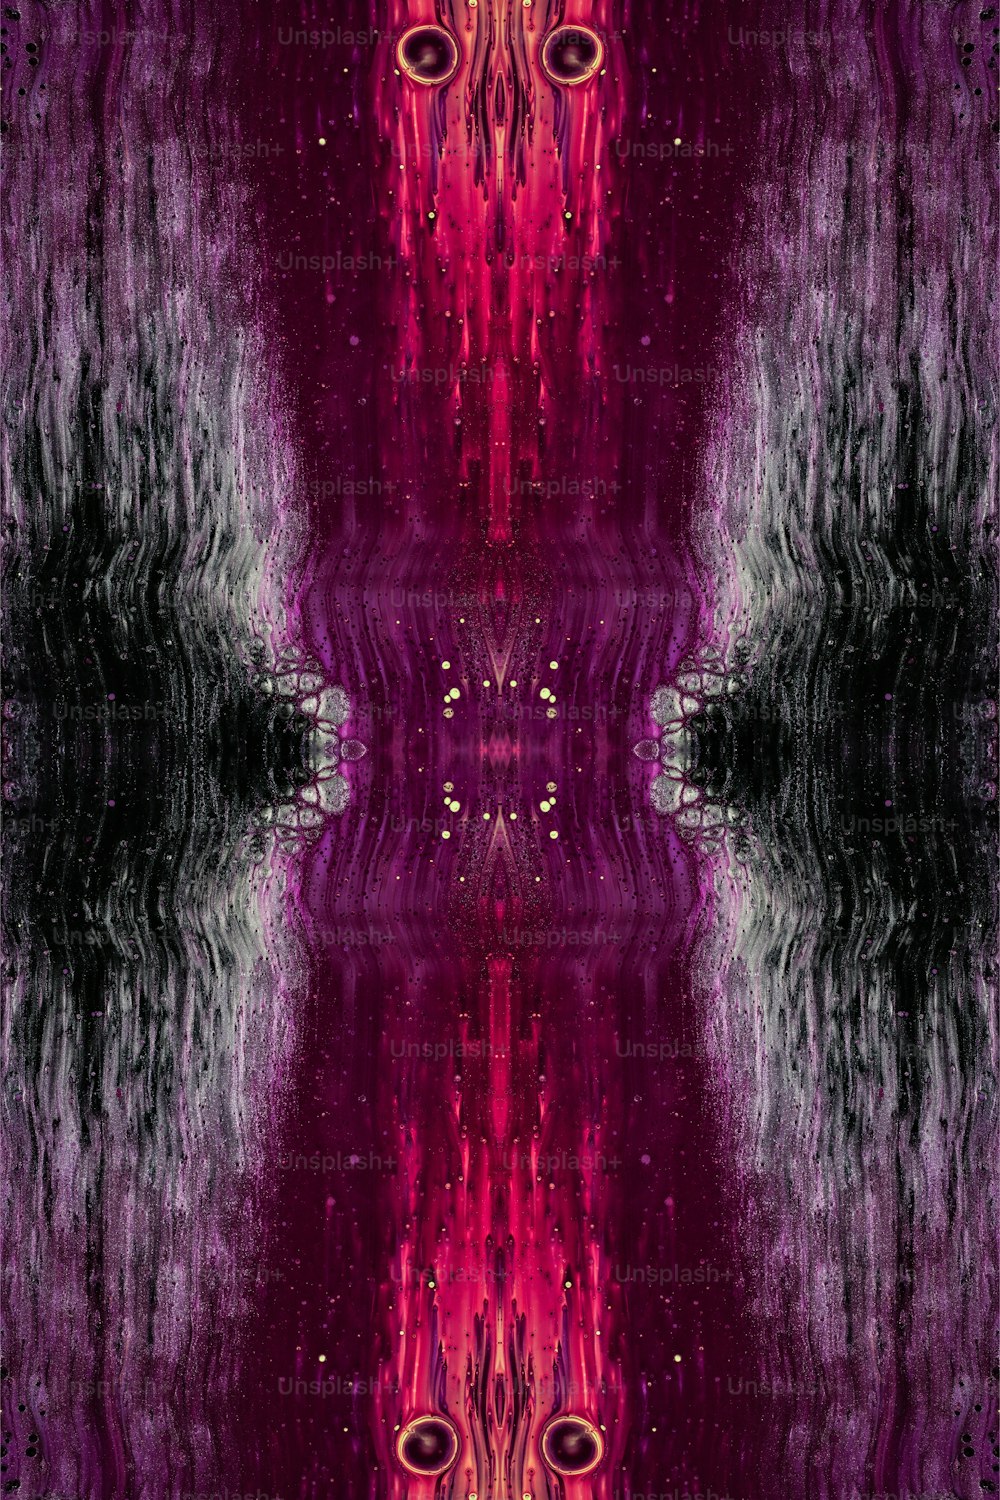 an abstract image of a red and purple background